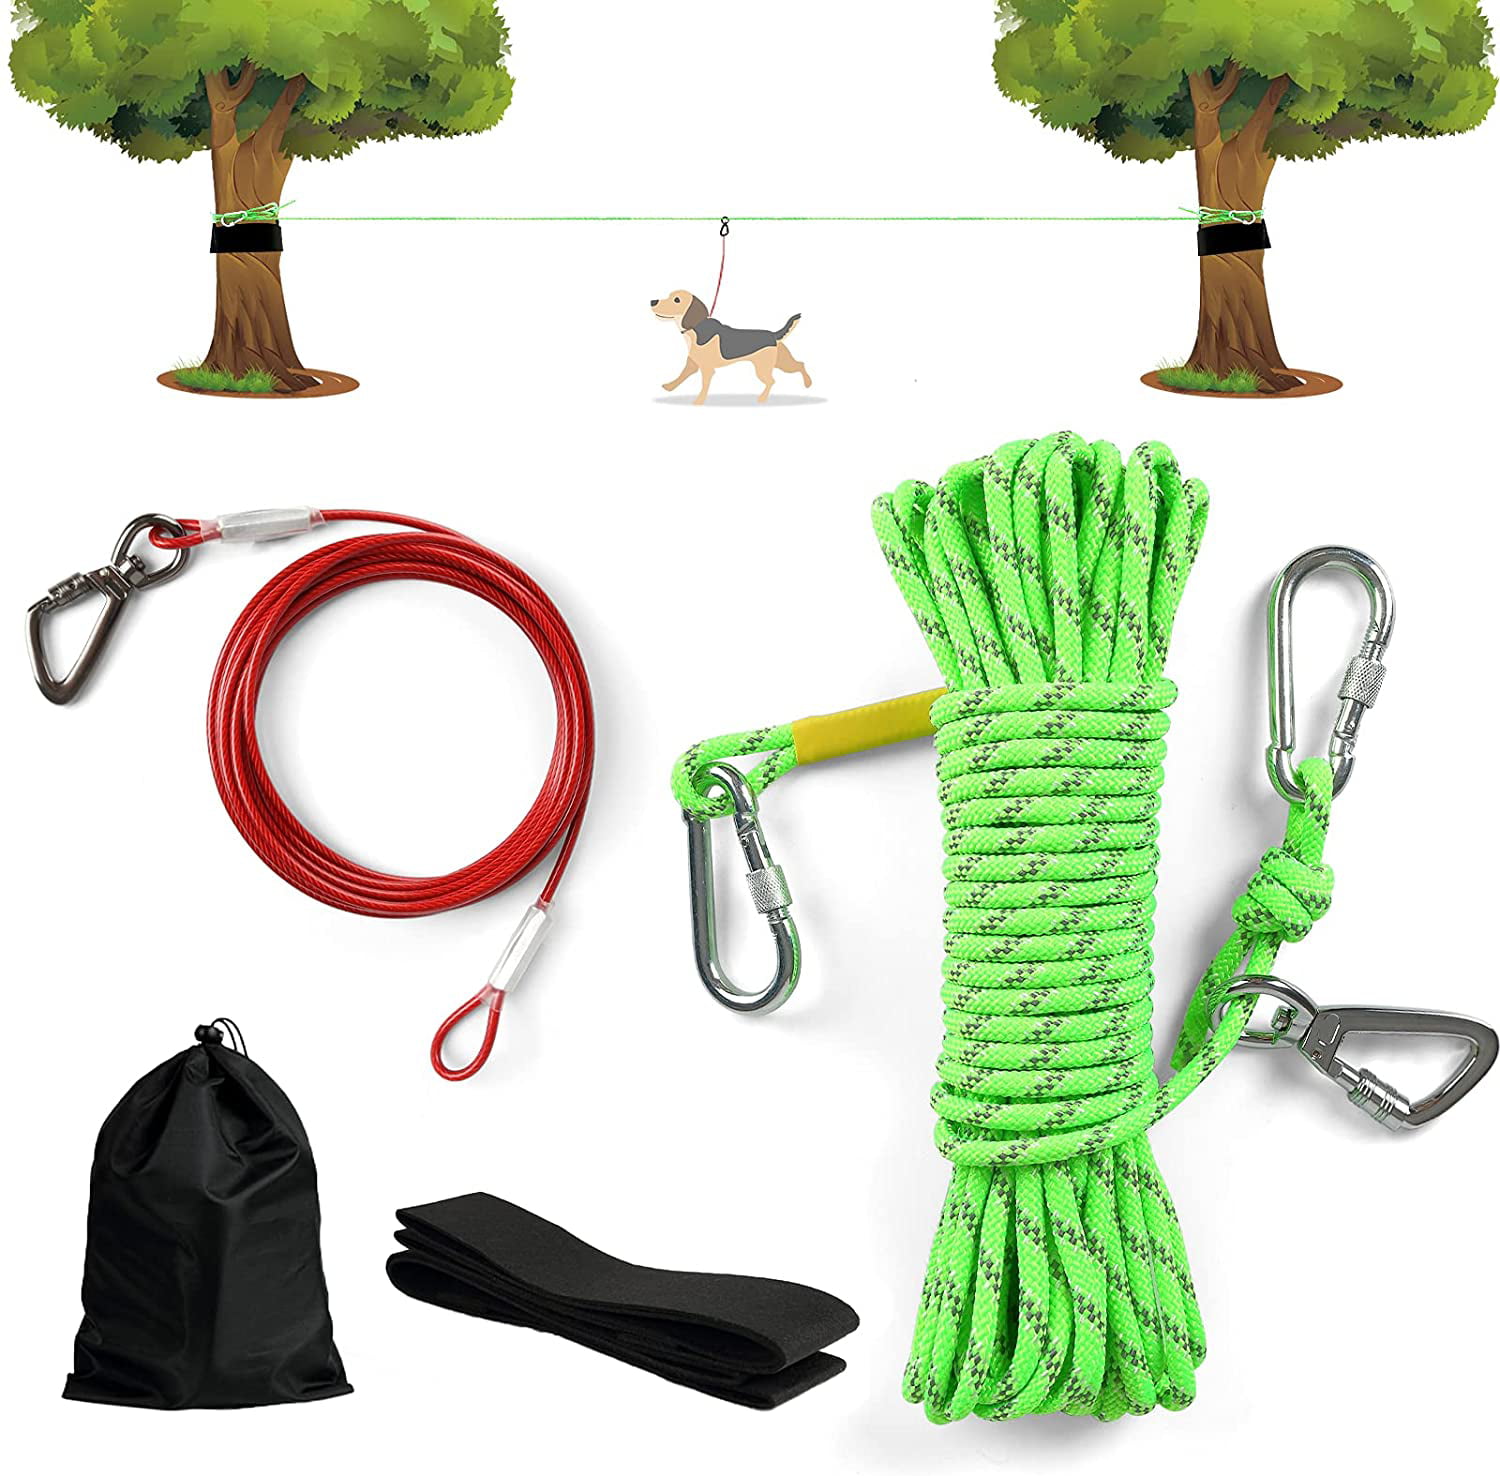 50ft/70ft/100ft Reflective Dog Lead for Yard Parks Camping Outdoor Events for Large Medium Small Dogs up to 200lbs XiaZ Dog Tie Out Cable Portable Dog Run Trolley System with 10FT Runner Lead